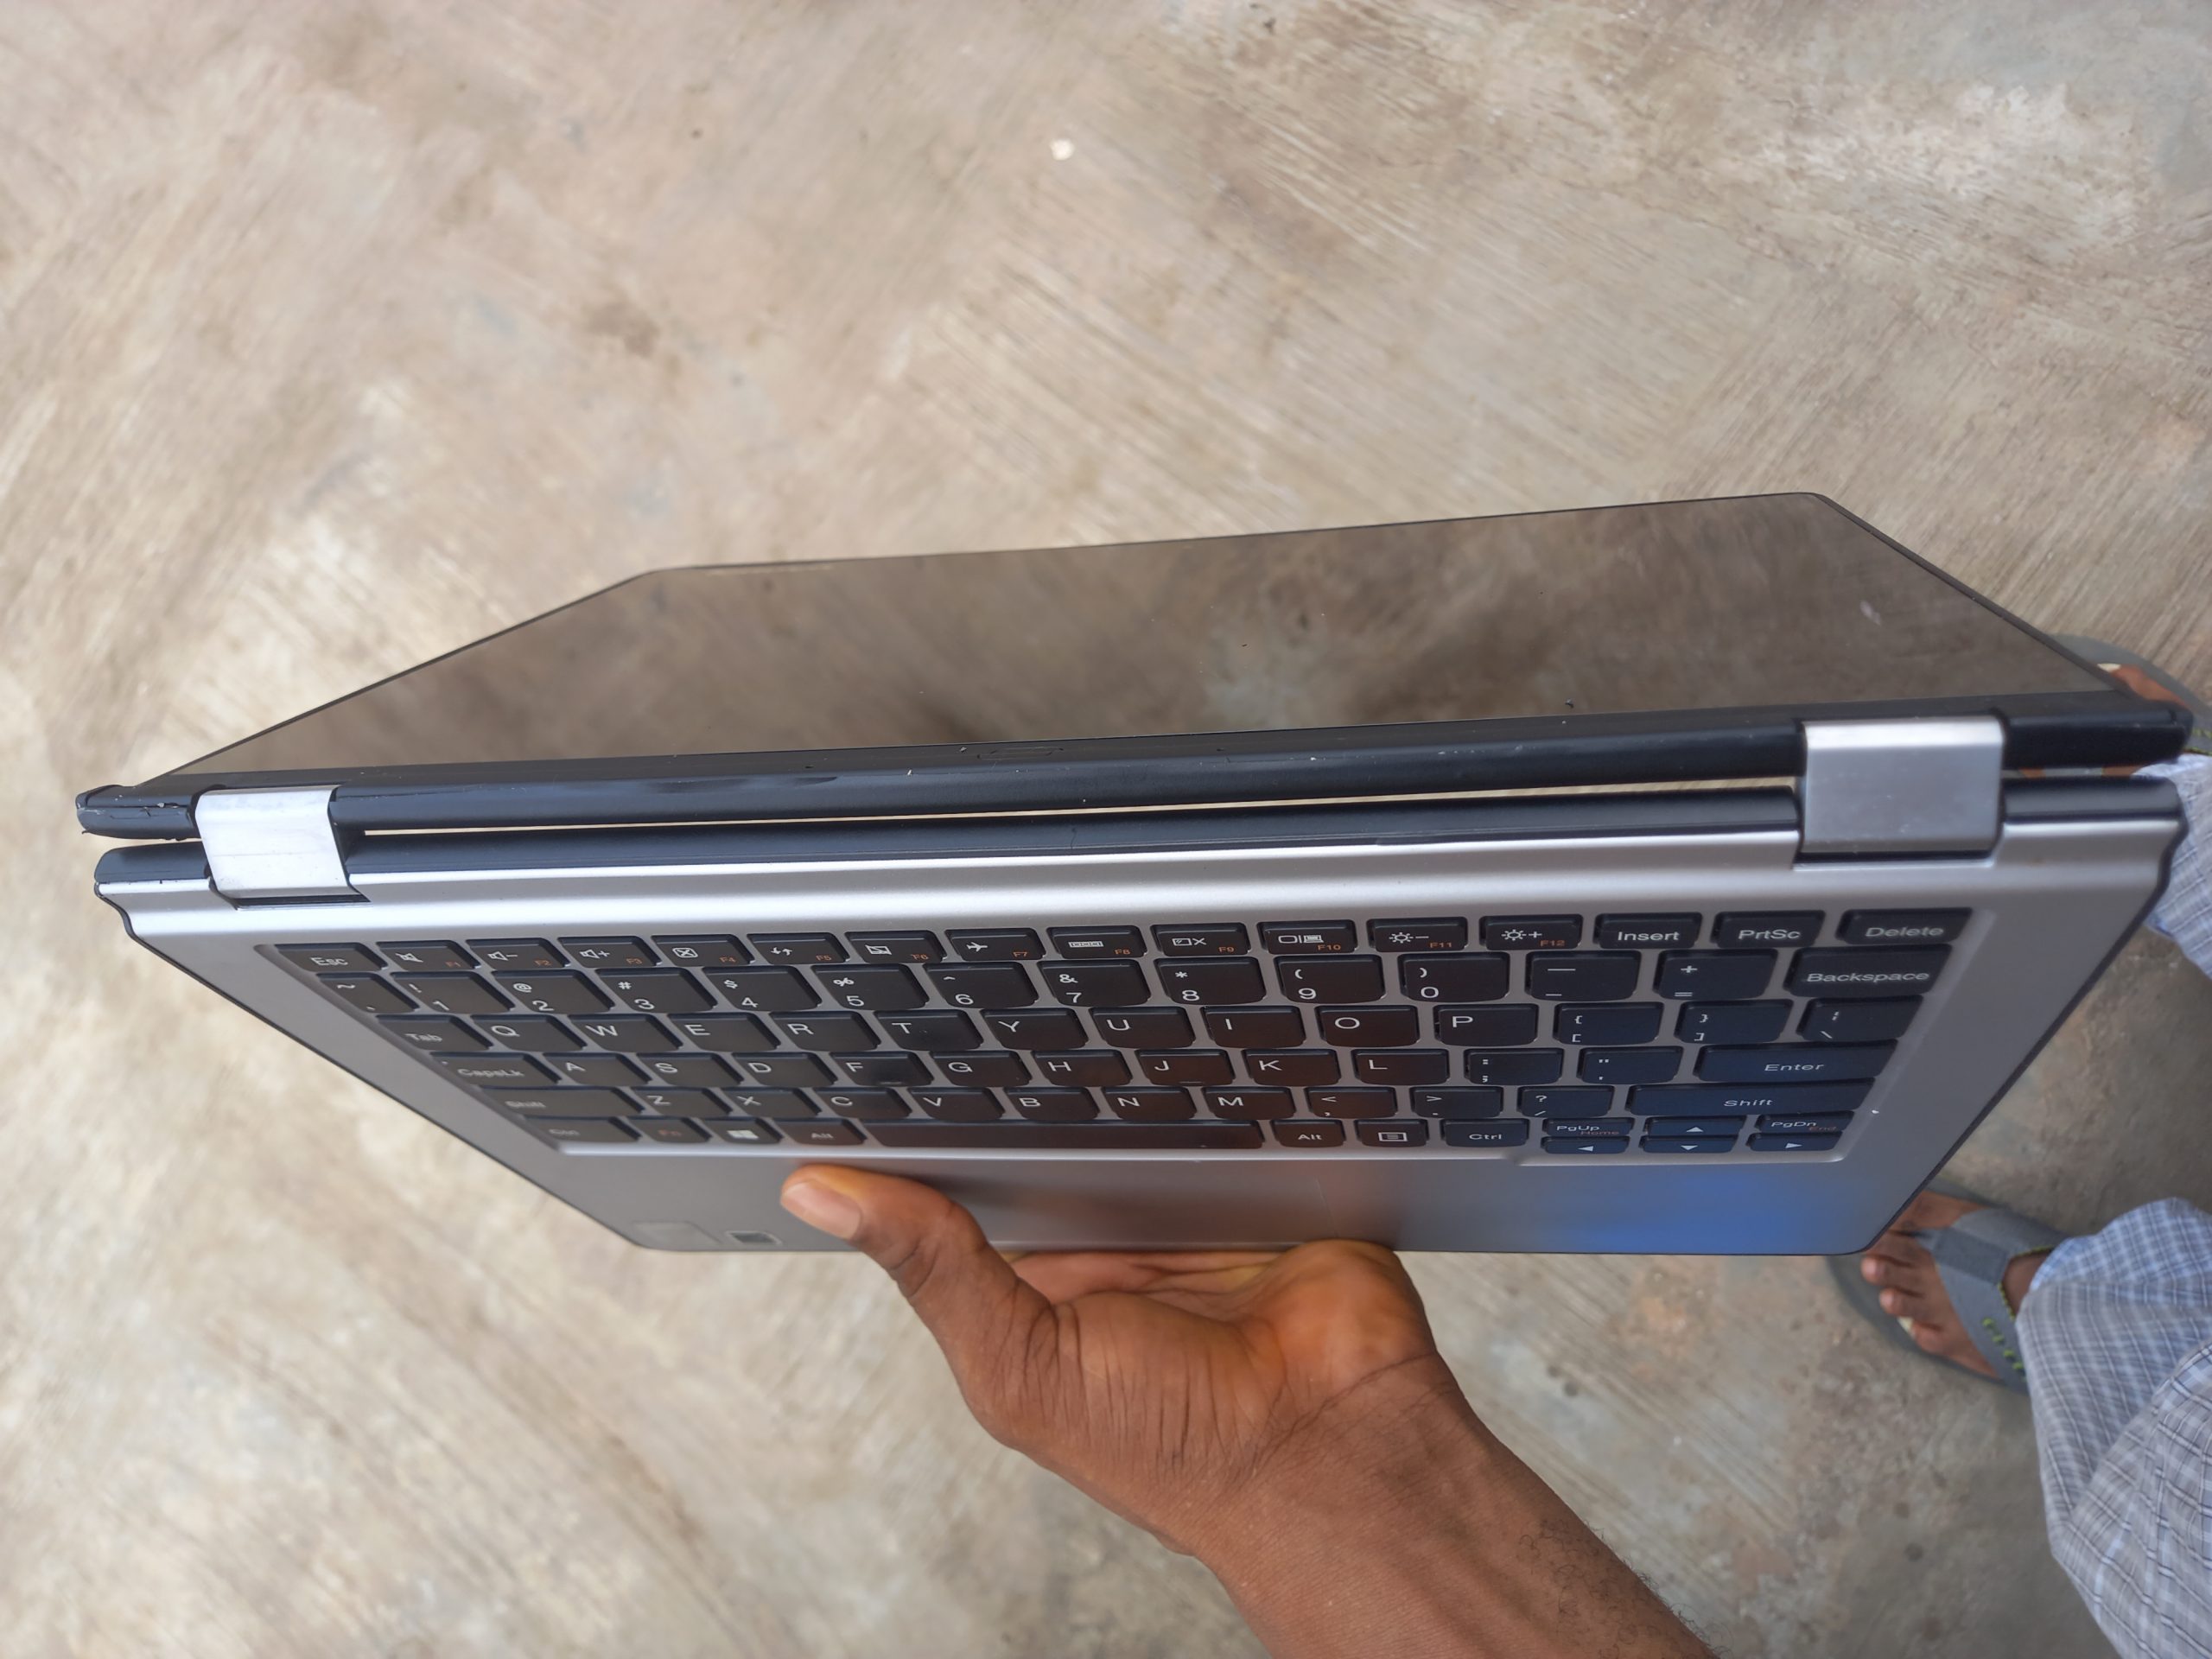 fairly used laptops for sale in ikeja,london used laptops price in nigeria,london used laptops in nigeria,london used laptops on jumia,laptop dealers in ikeja,london used laptops on jiji,uk used laptop computers at affordable prices oshodi,used hp laptop for sale in lagos,Best Laptop Shops in Ikeja, Uk used laptop for sale in Abuja, used laptop for sale in computer village lagos, tokumbo laptop for sale in ikeja computer village lagos, how to buy a good laptop in computer village ikeja lagos, perfectly working uk used laptop for sale in ikeja computer vilage, ceap wholesale laptop store shop in ikeja computer village,ikeja medical road computer village lagos, how to repair laptop in 2022, ow to load windows 11 os operating system,Lenovo yoga 2 11 4th generation core i3